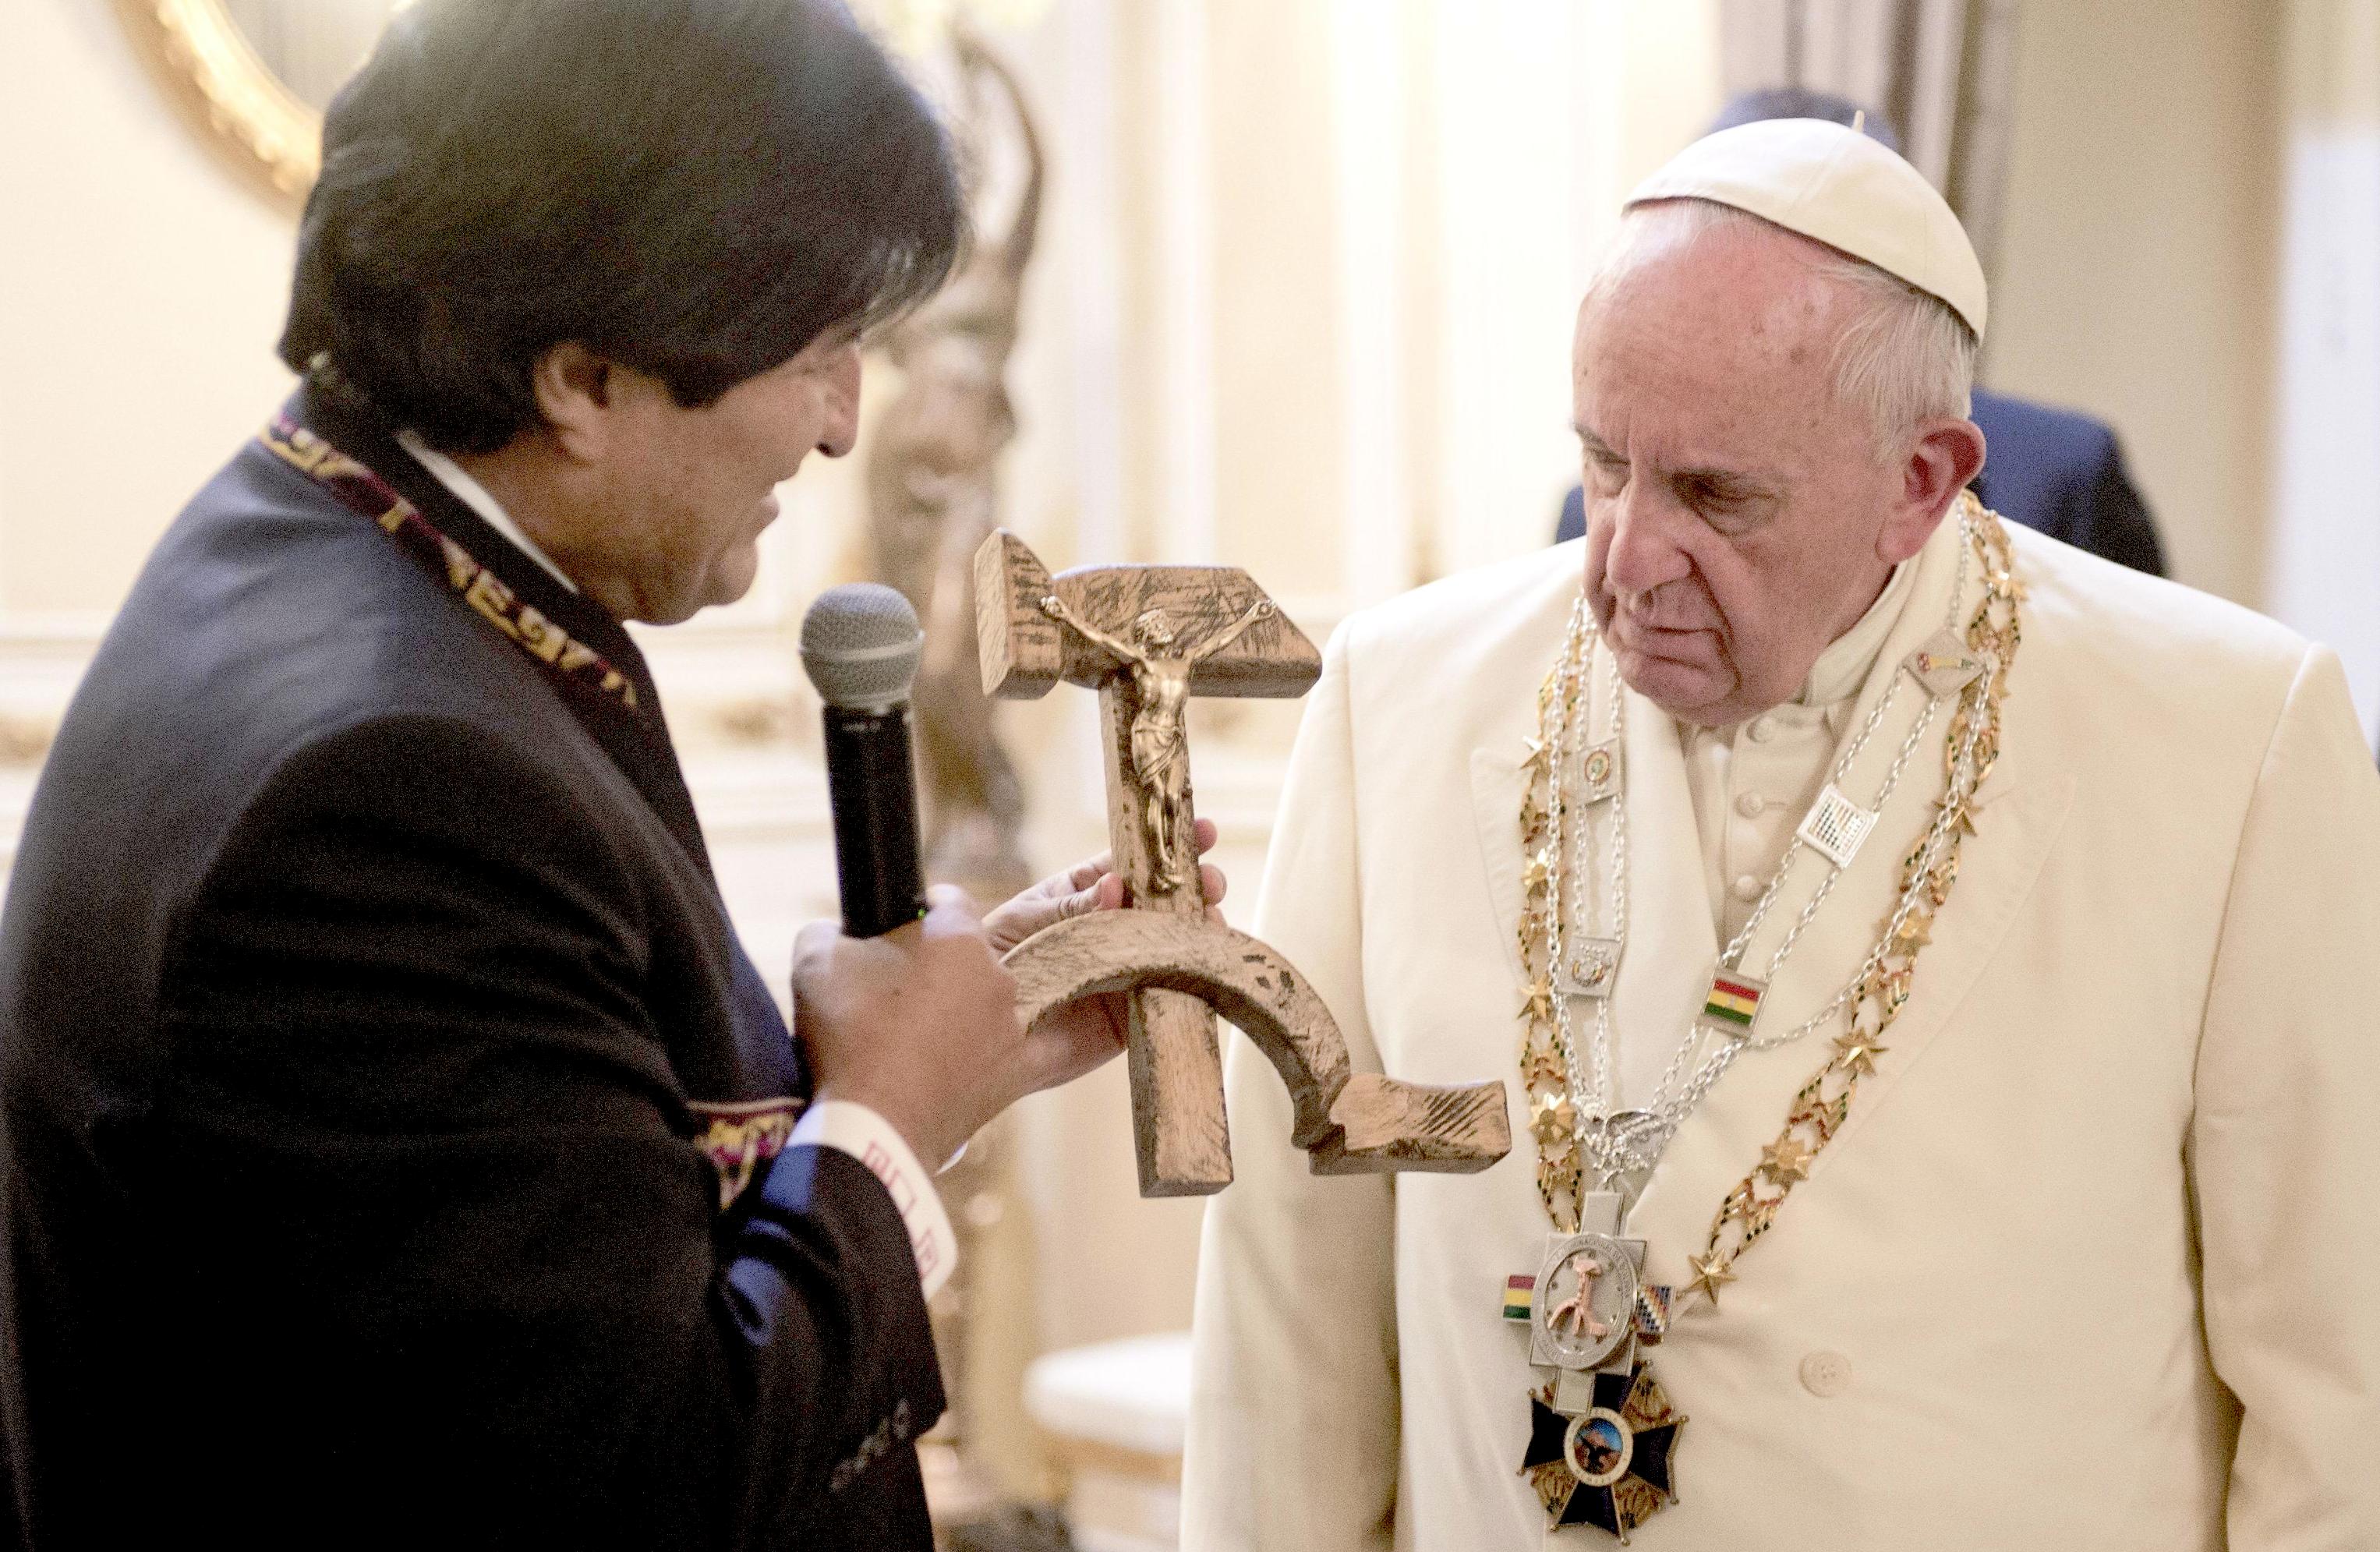 Crucifix carved into a wooden hammer and sickle given to Pope Francis by Bolivian President Evo Morales